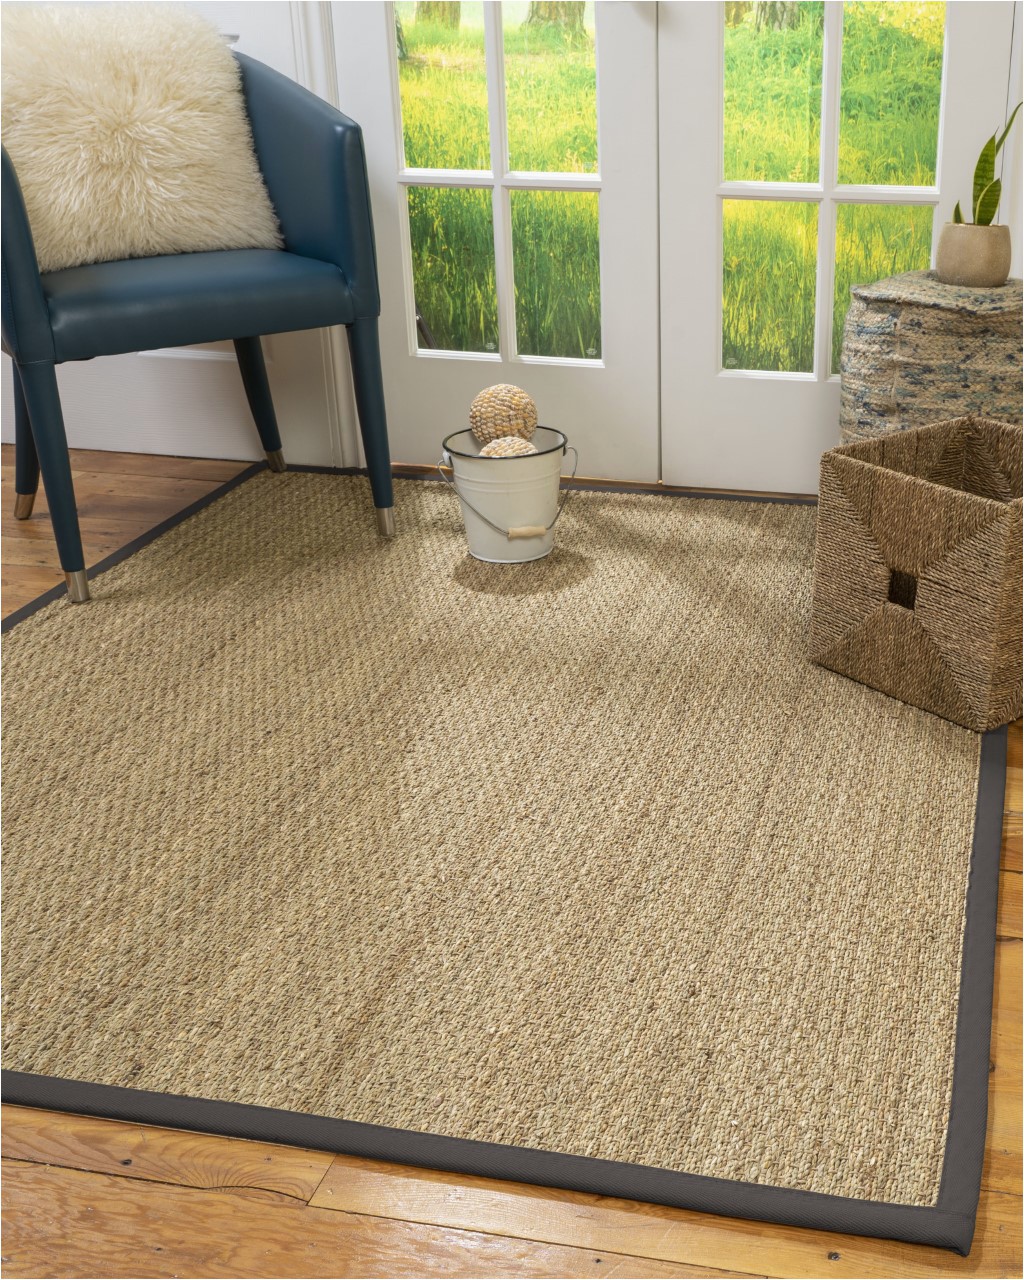 12 by 18 area Rugs Natural area Rugs Half Panama Custom Seagrass Rug 12 X 18 Yx Border